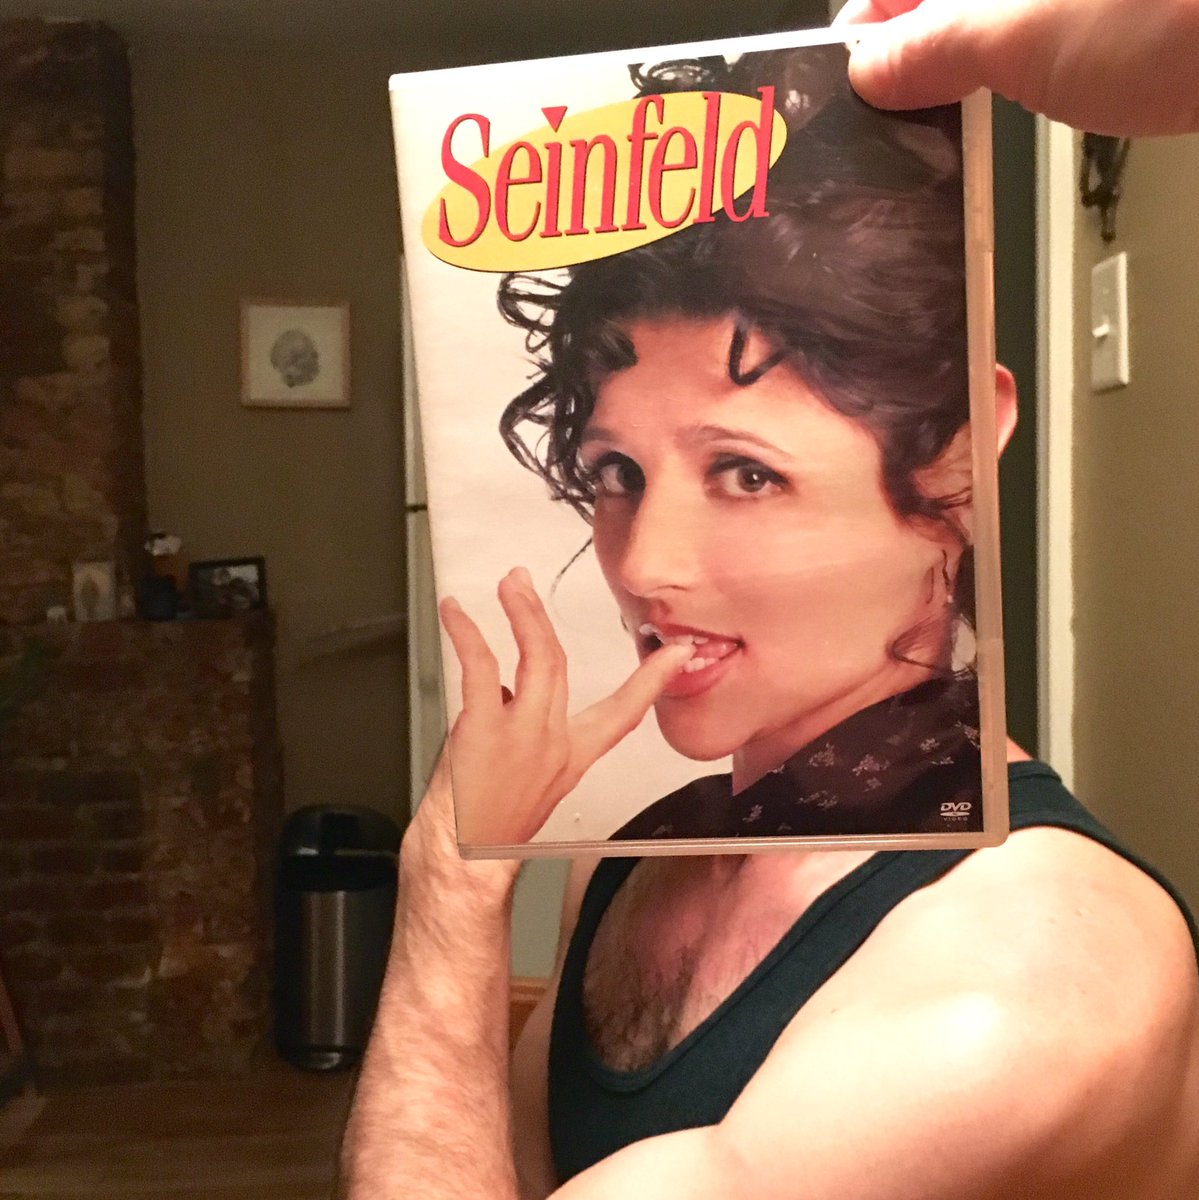 Ben O'Brien poses with the Seinfeld DVD sleeve as though he is Elaine (Ben O'Brien/Kelly Lasserre/Twitter)